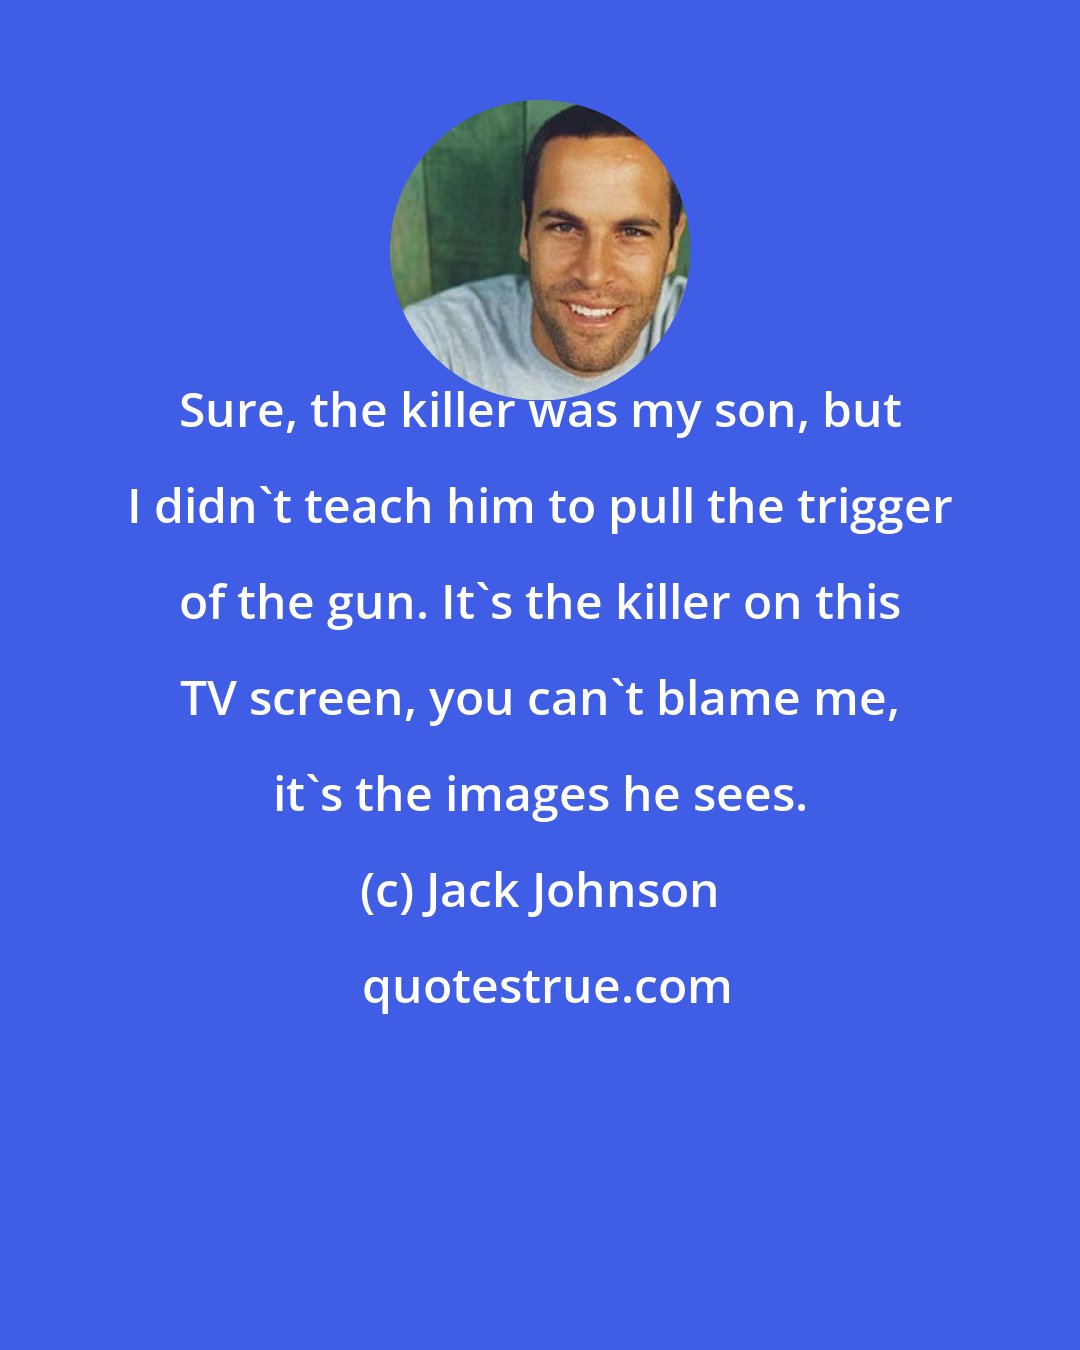 Jack Johnson: Sure, the killer was my son, but I didn't teach him to pull the trigger of the gun. It's the killer on this TV screen, you can't blame me, it's the images he sees.